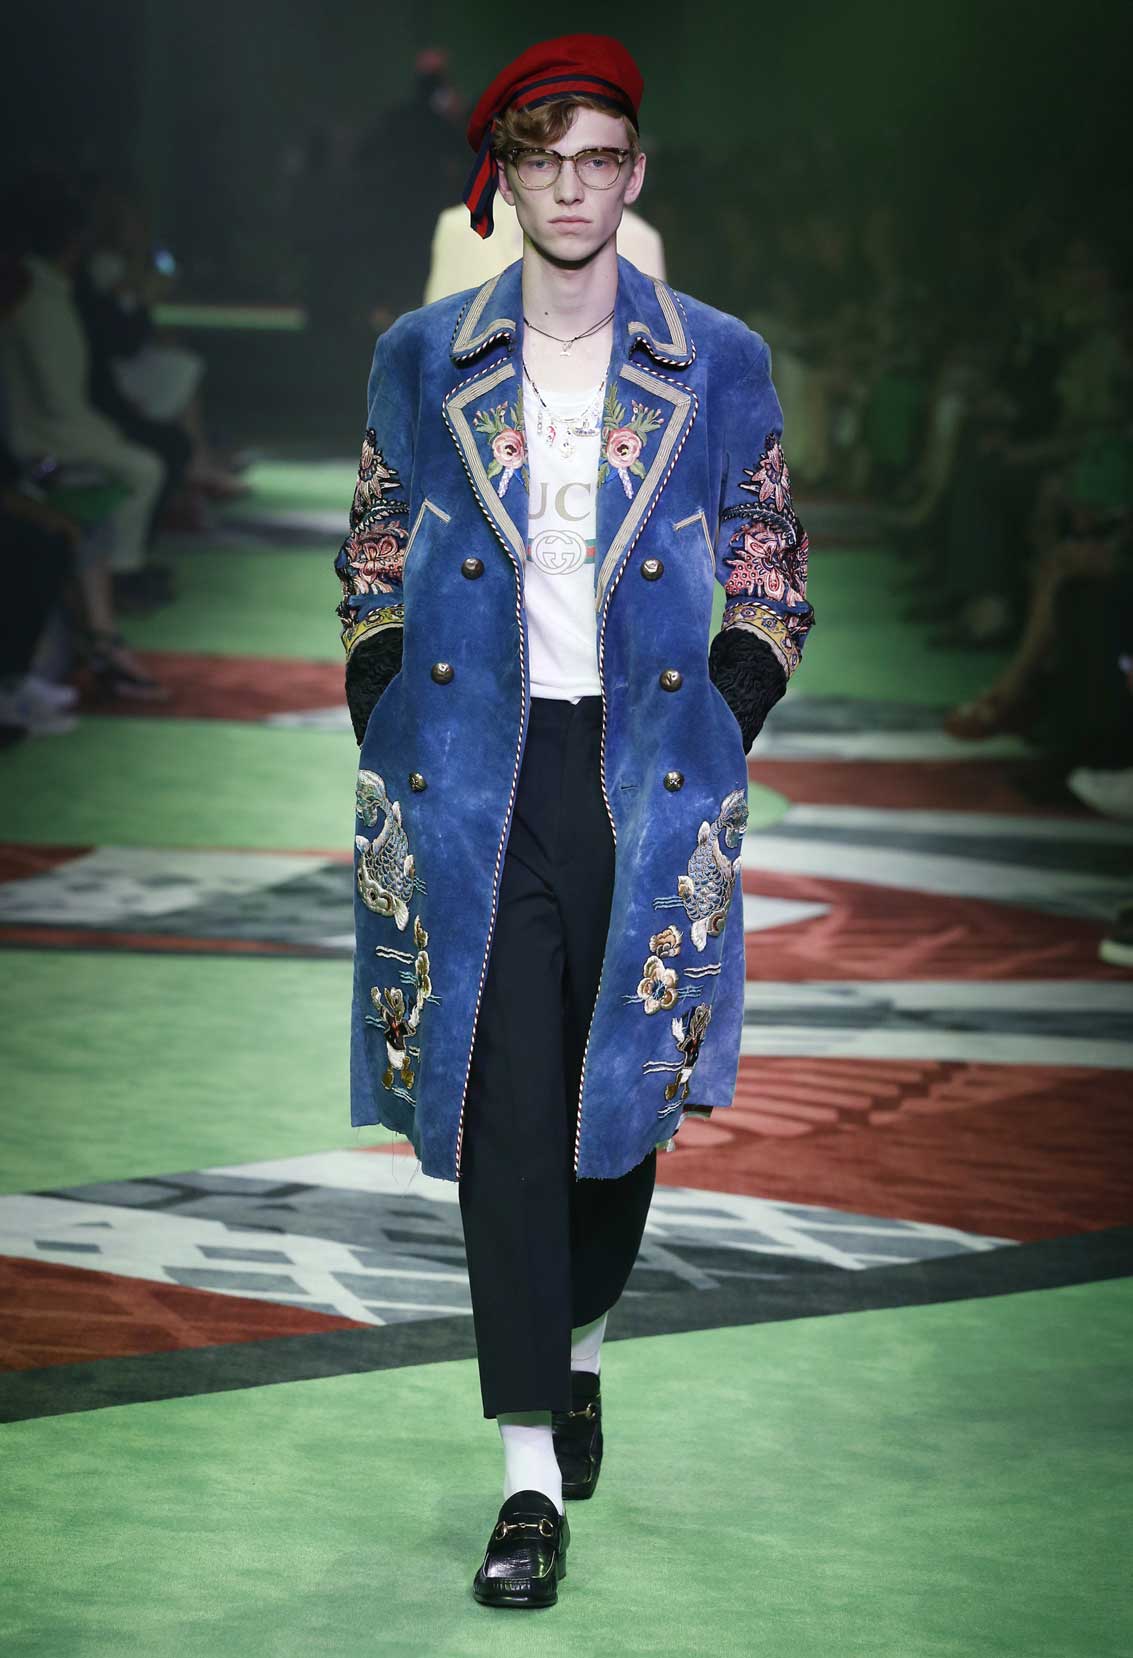 Gucci Mens SS17 show clothes and accessories women could wear too - Grazia